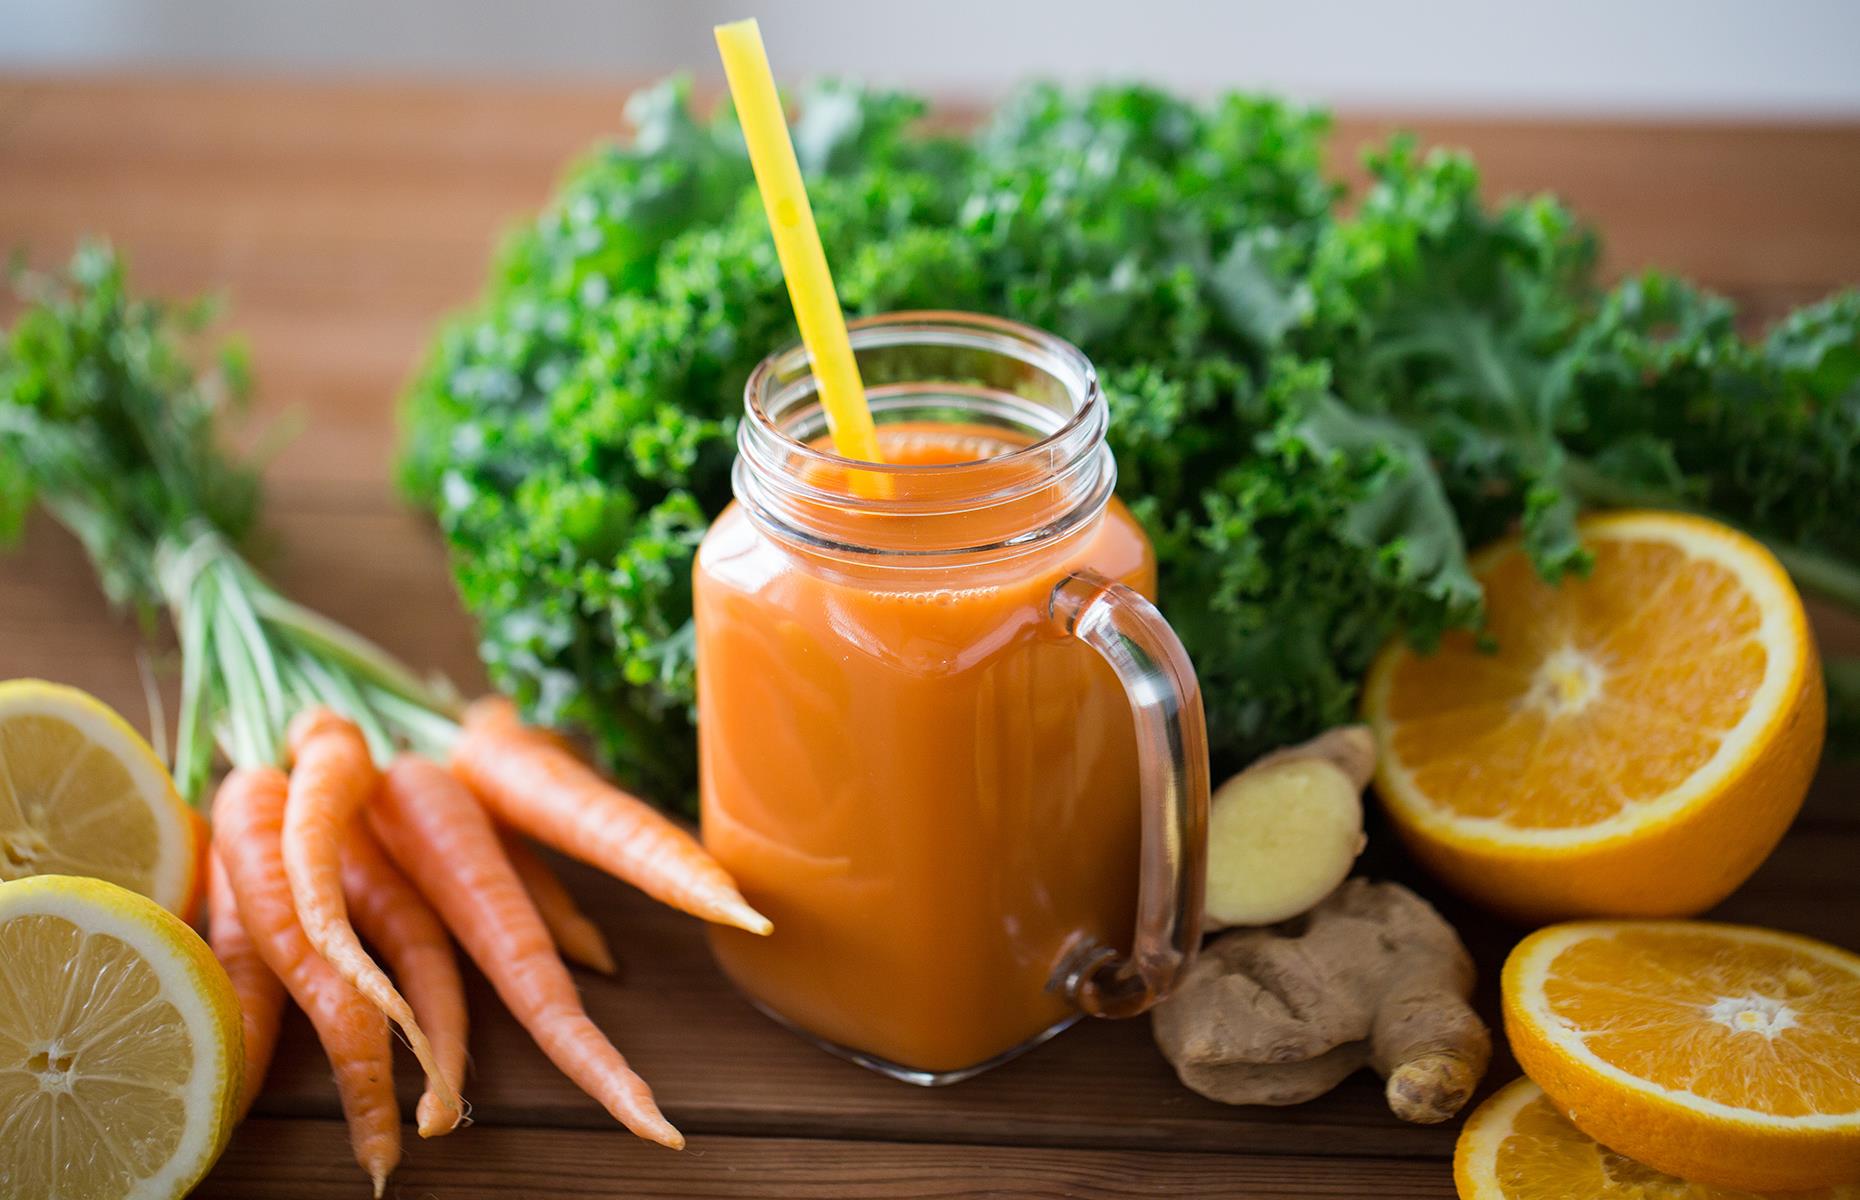 Juicing is the best way to eat lots of fruit and veg